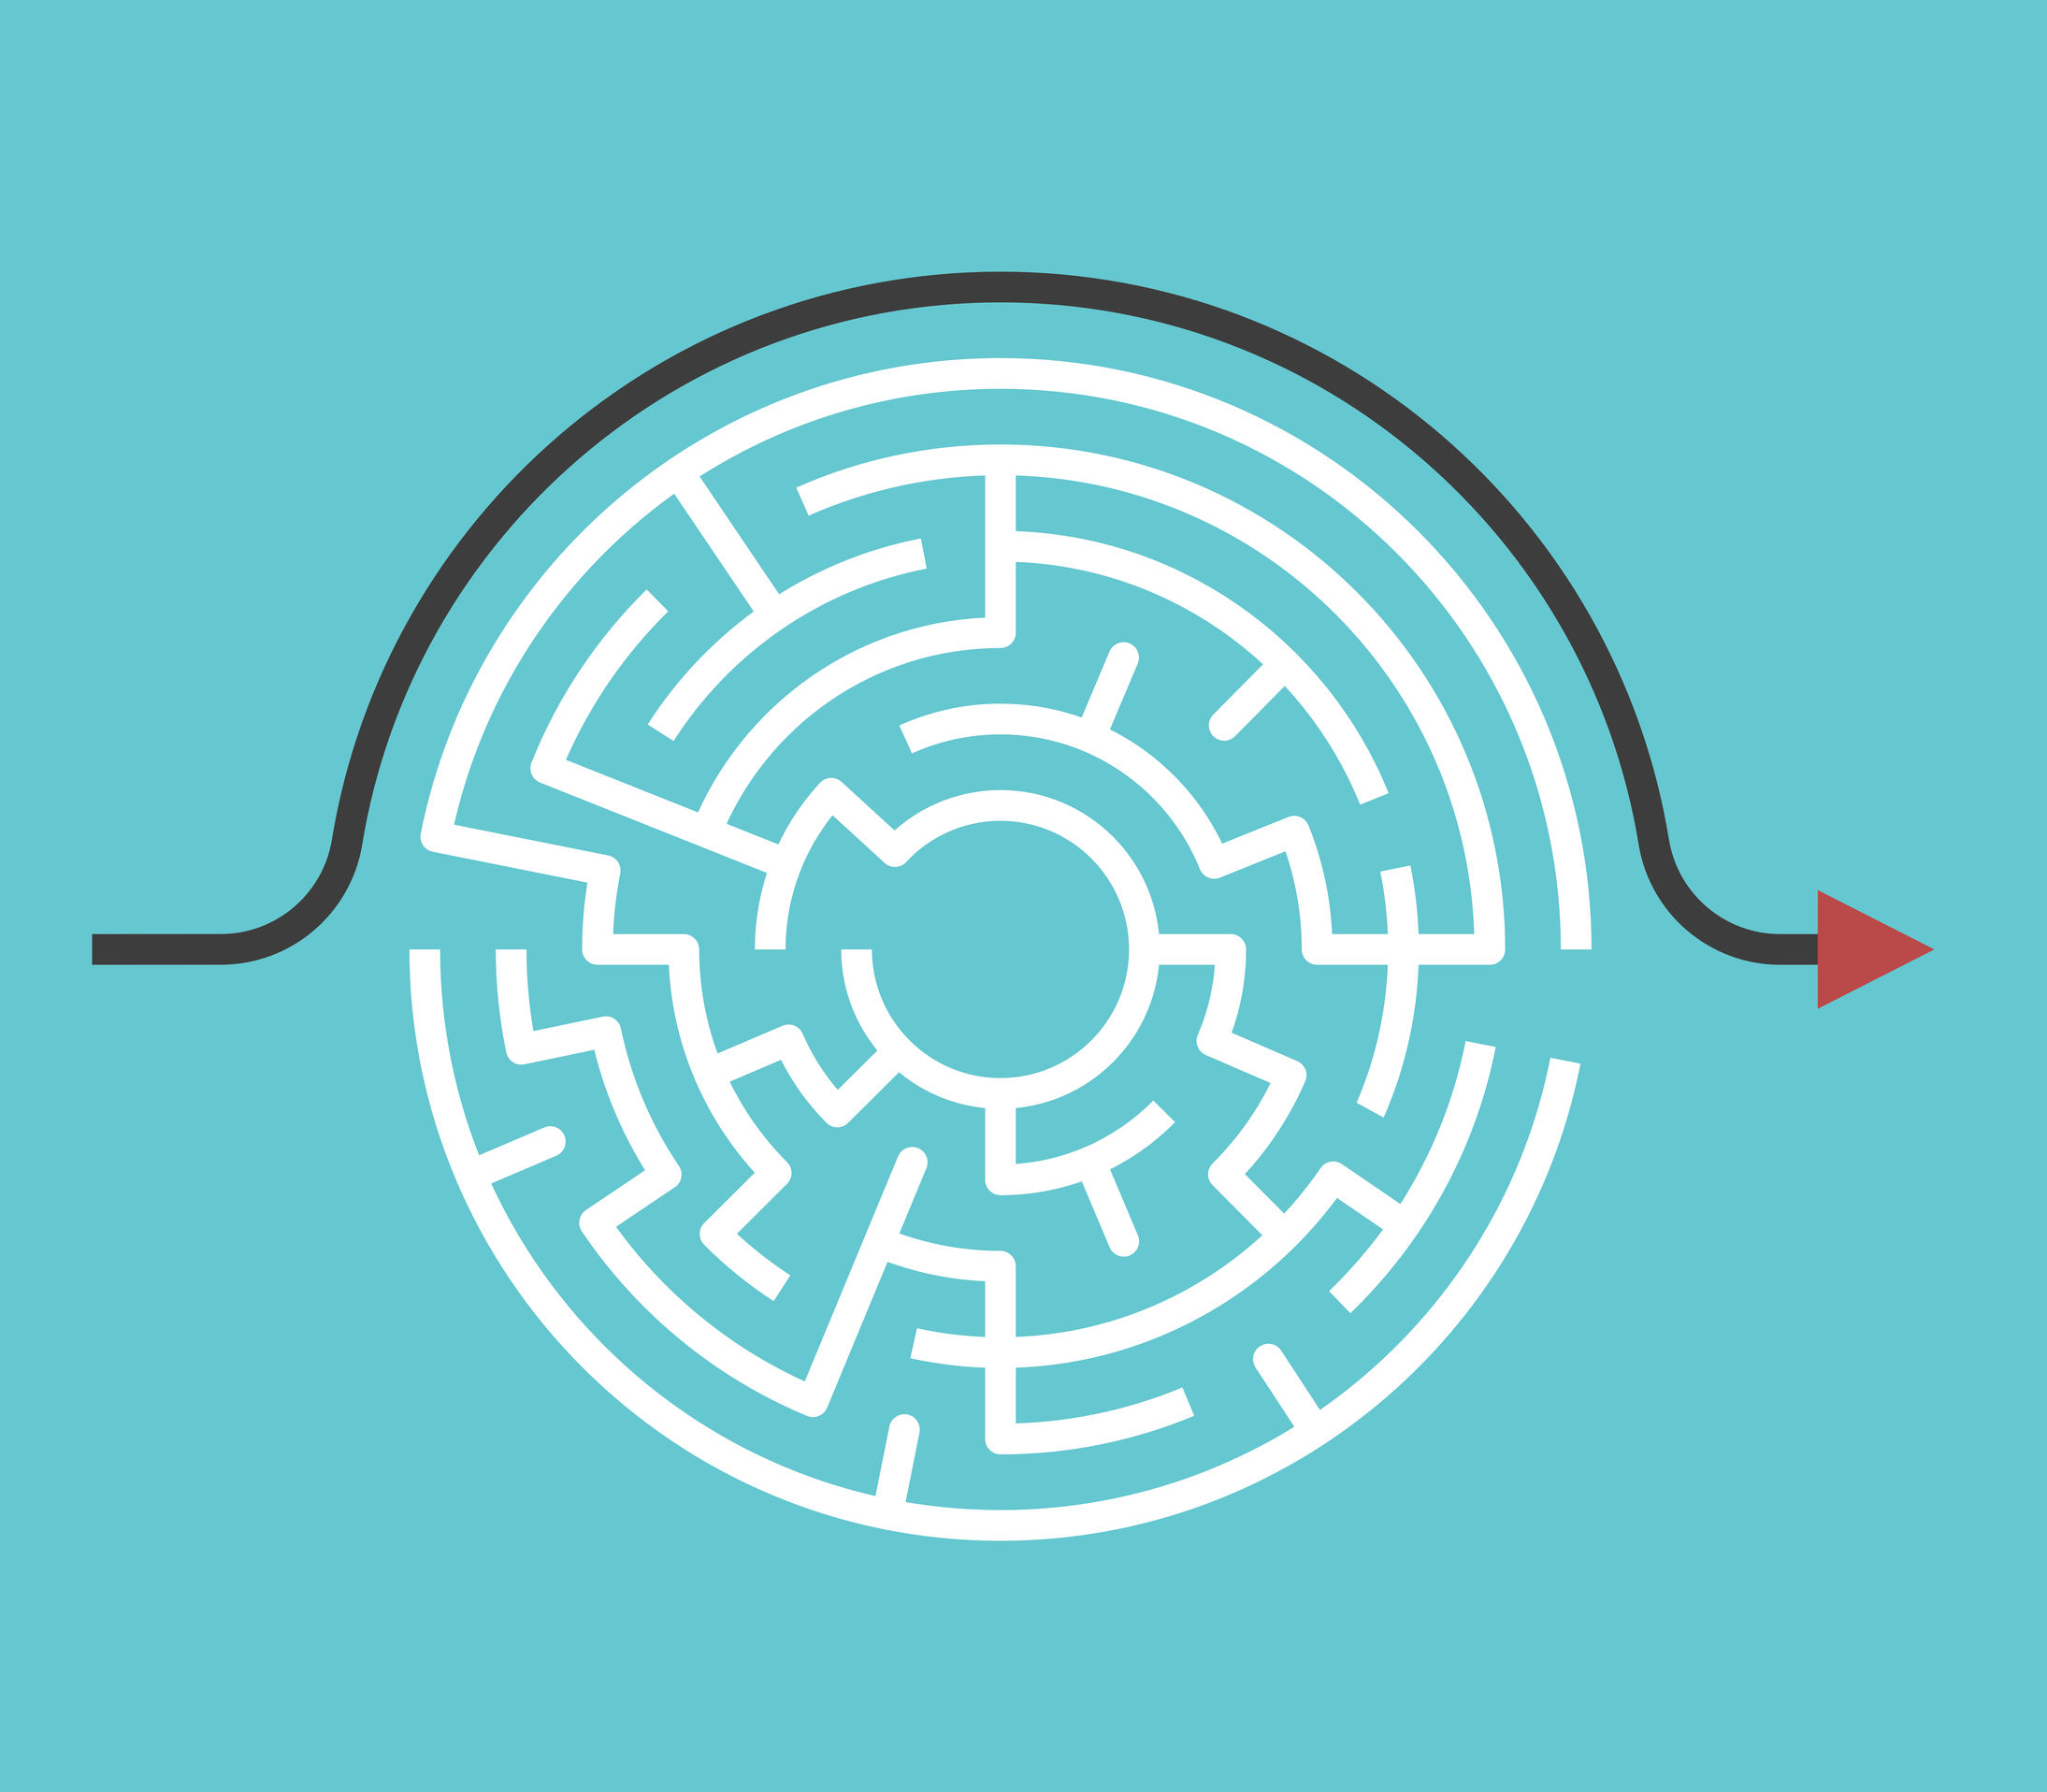 Image of an arrow running from left to right above a circular maze